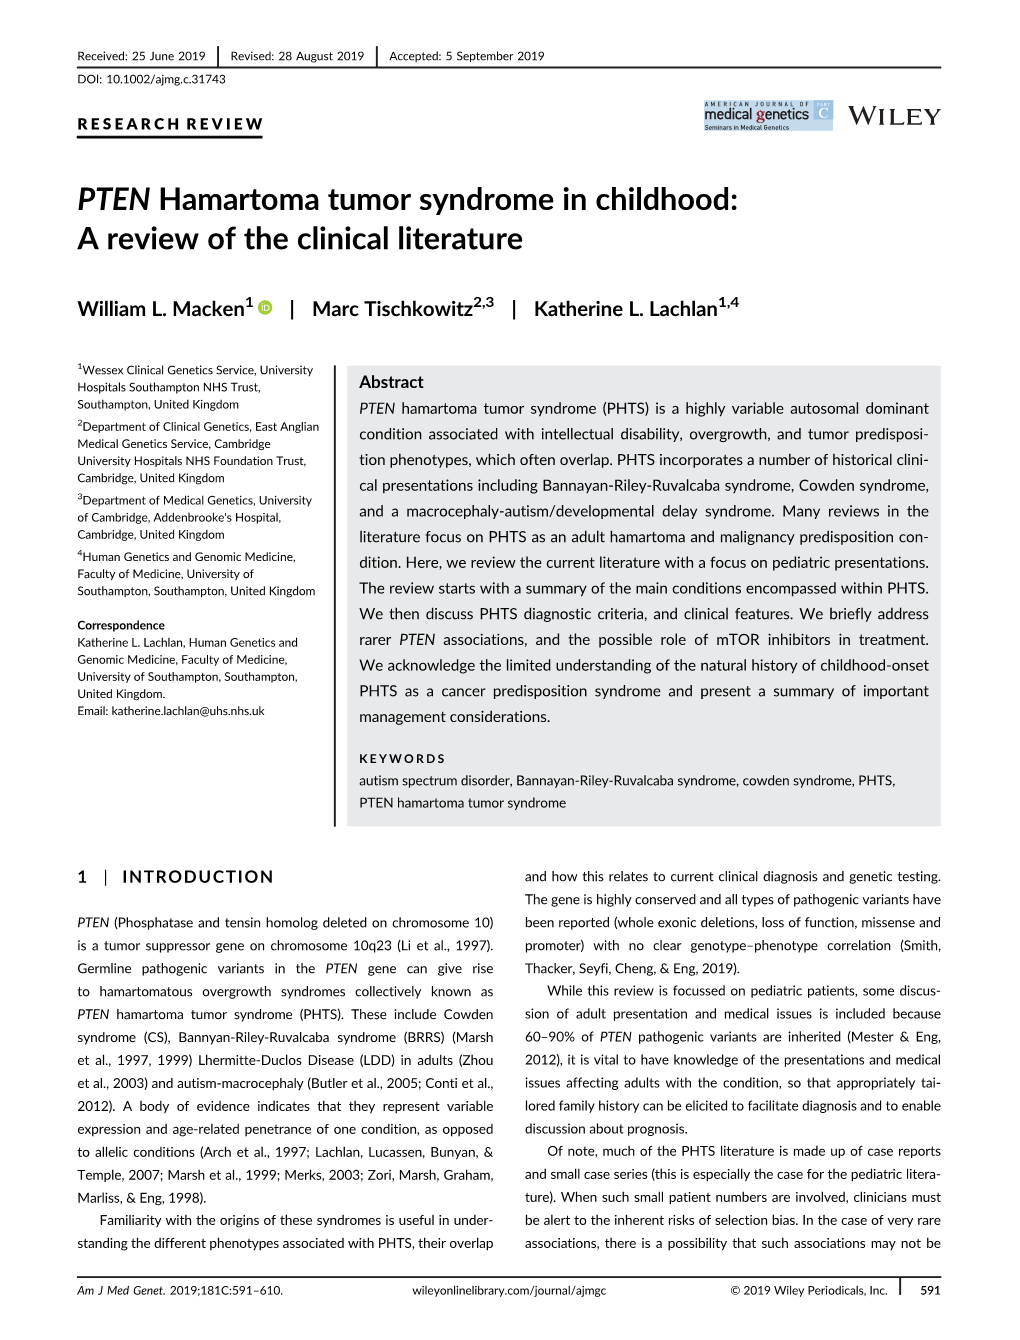 PTEN Hamartoma Tumor Syndrome in Childhood; a Review of the Clinical